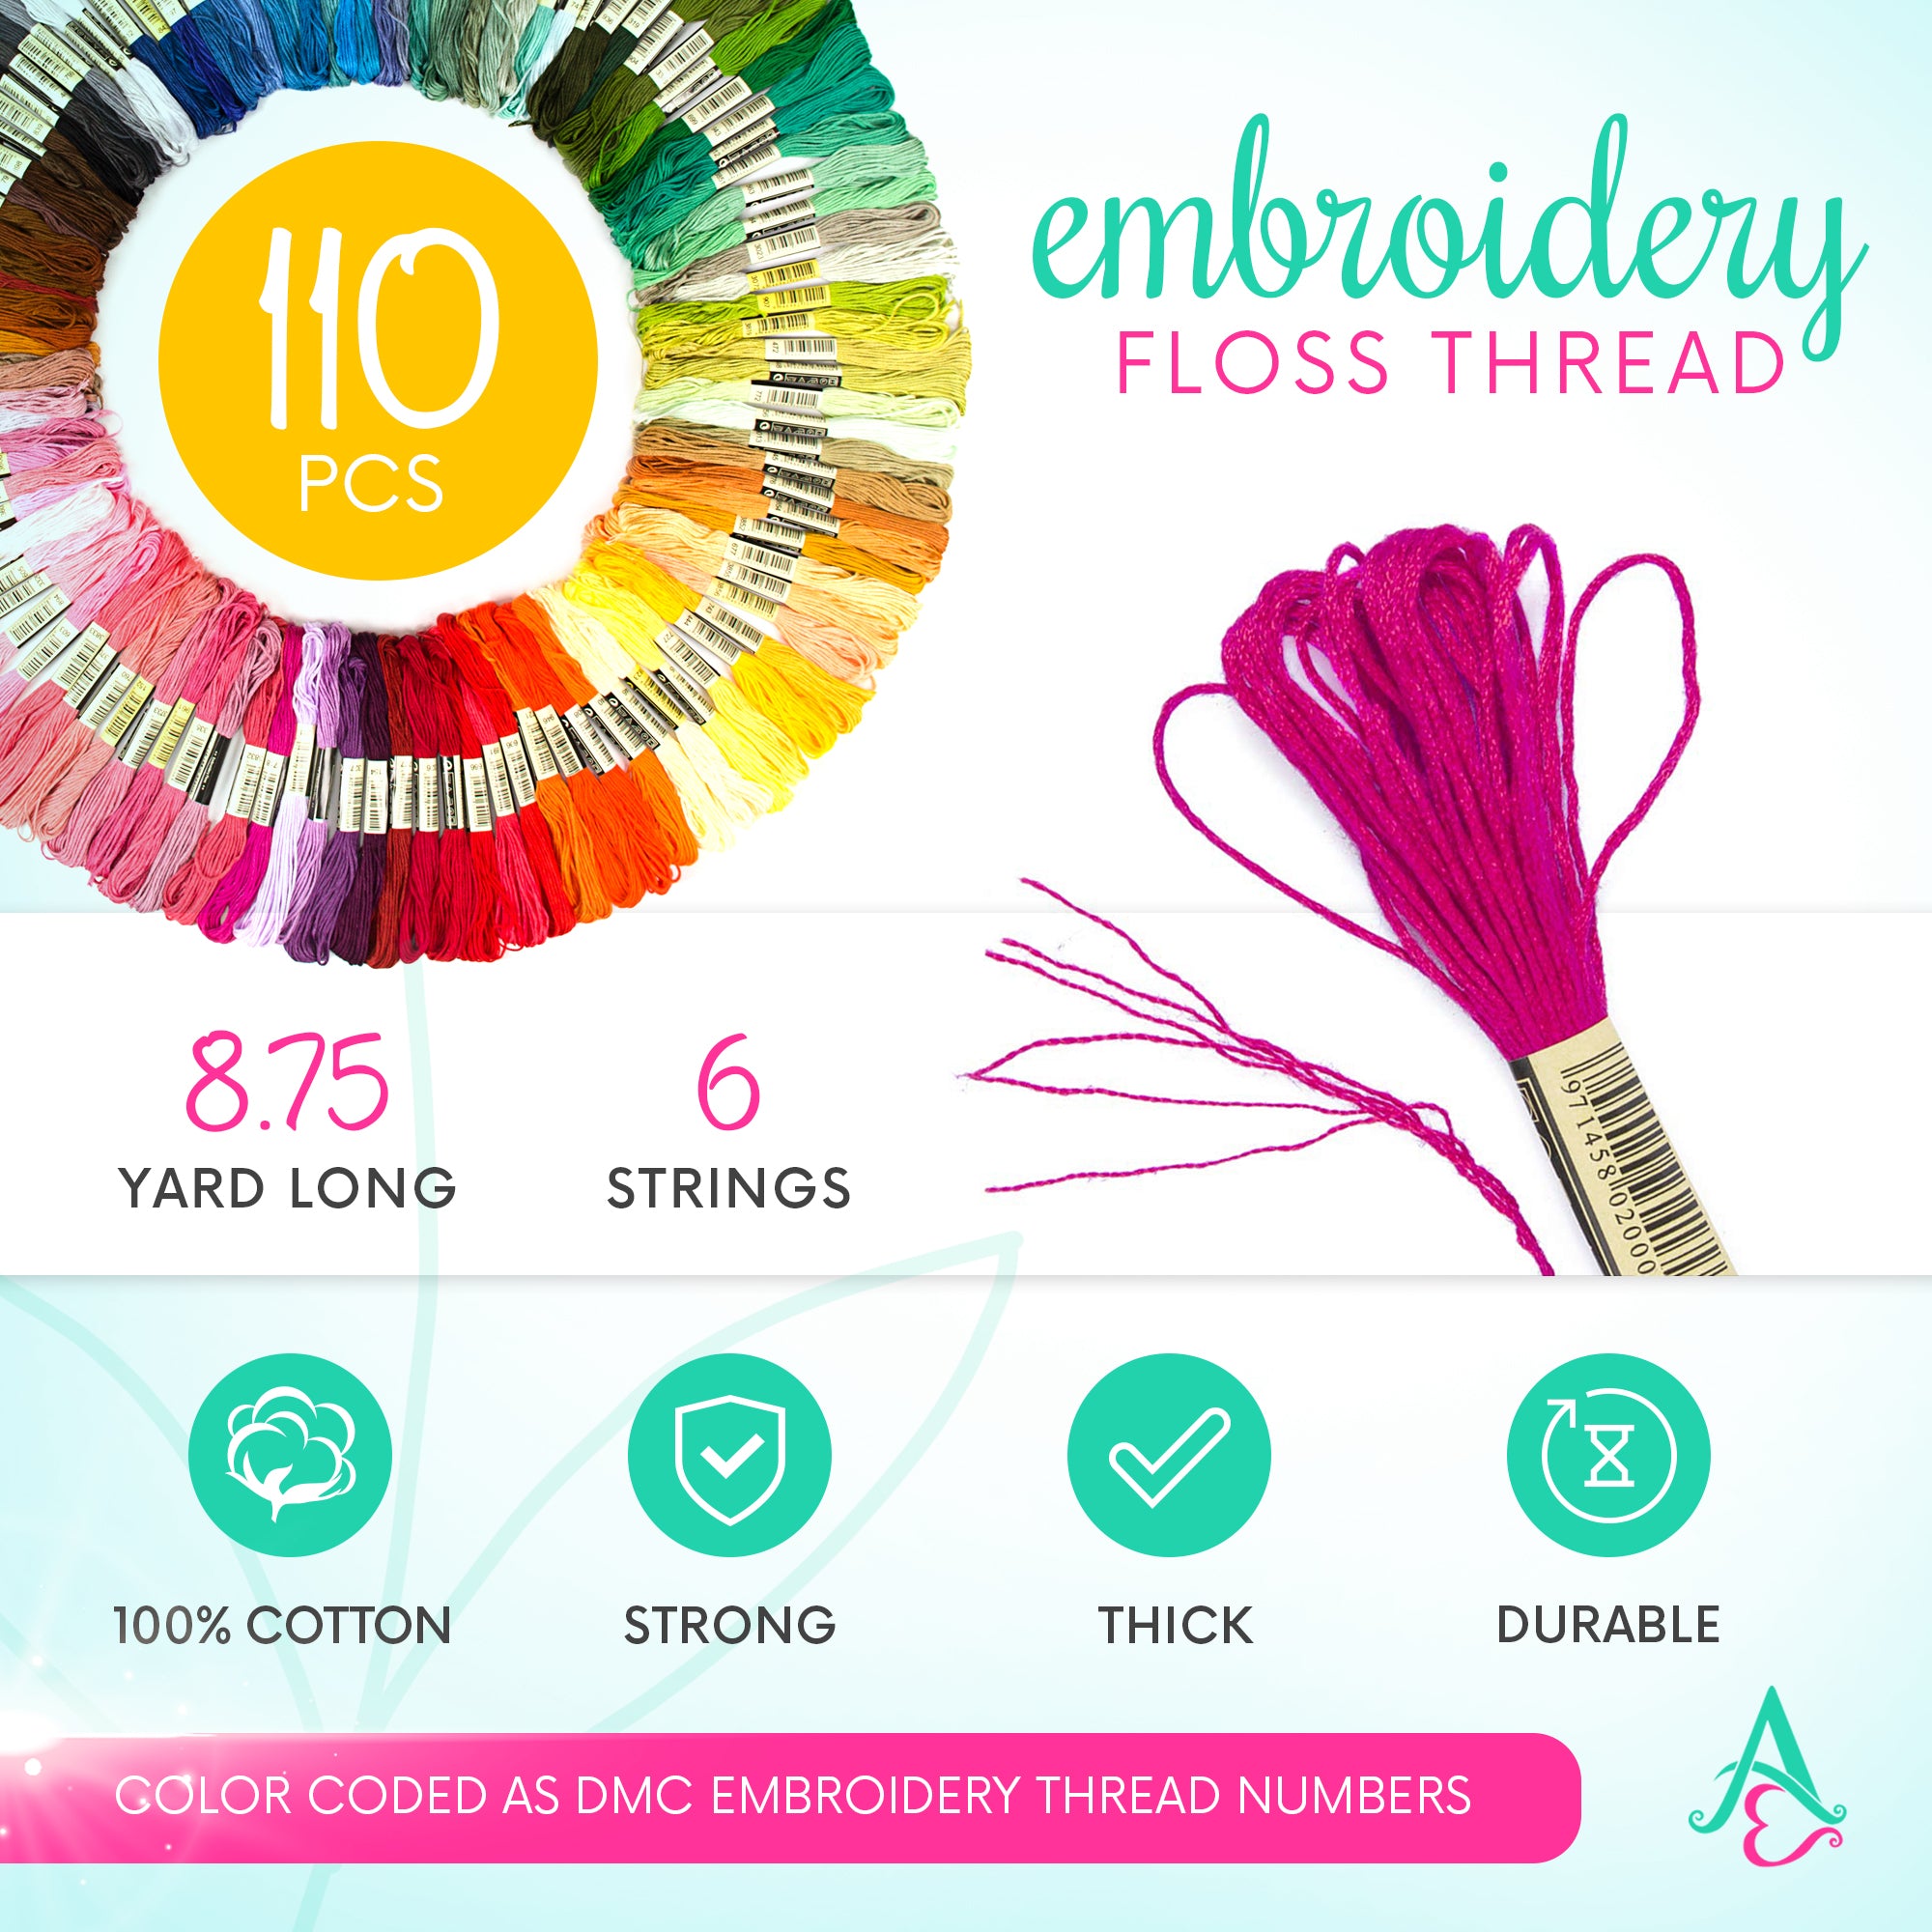 Embroidery Floss Friendship Bracelet String Kit 218 Pack - Embroidery Thread and Accessories - Perfect Thread for Cross Stitch, Hand Embroidery, Strin